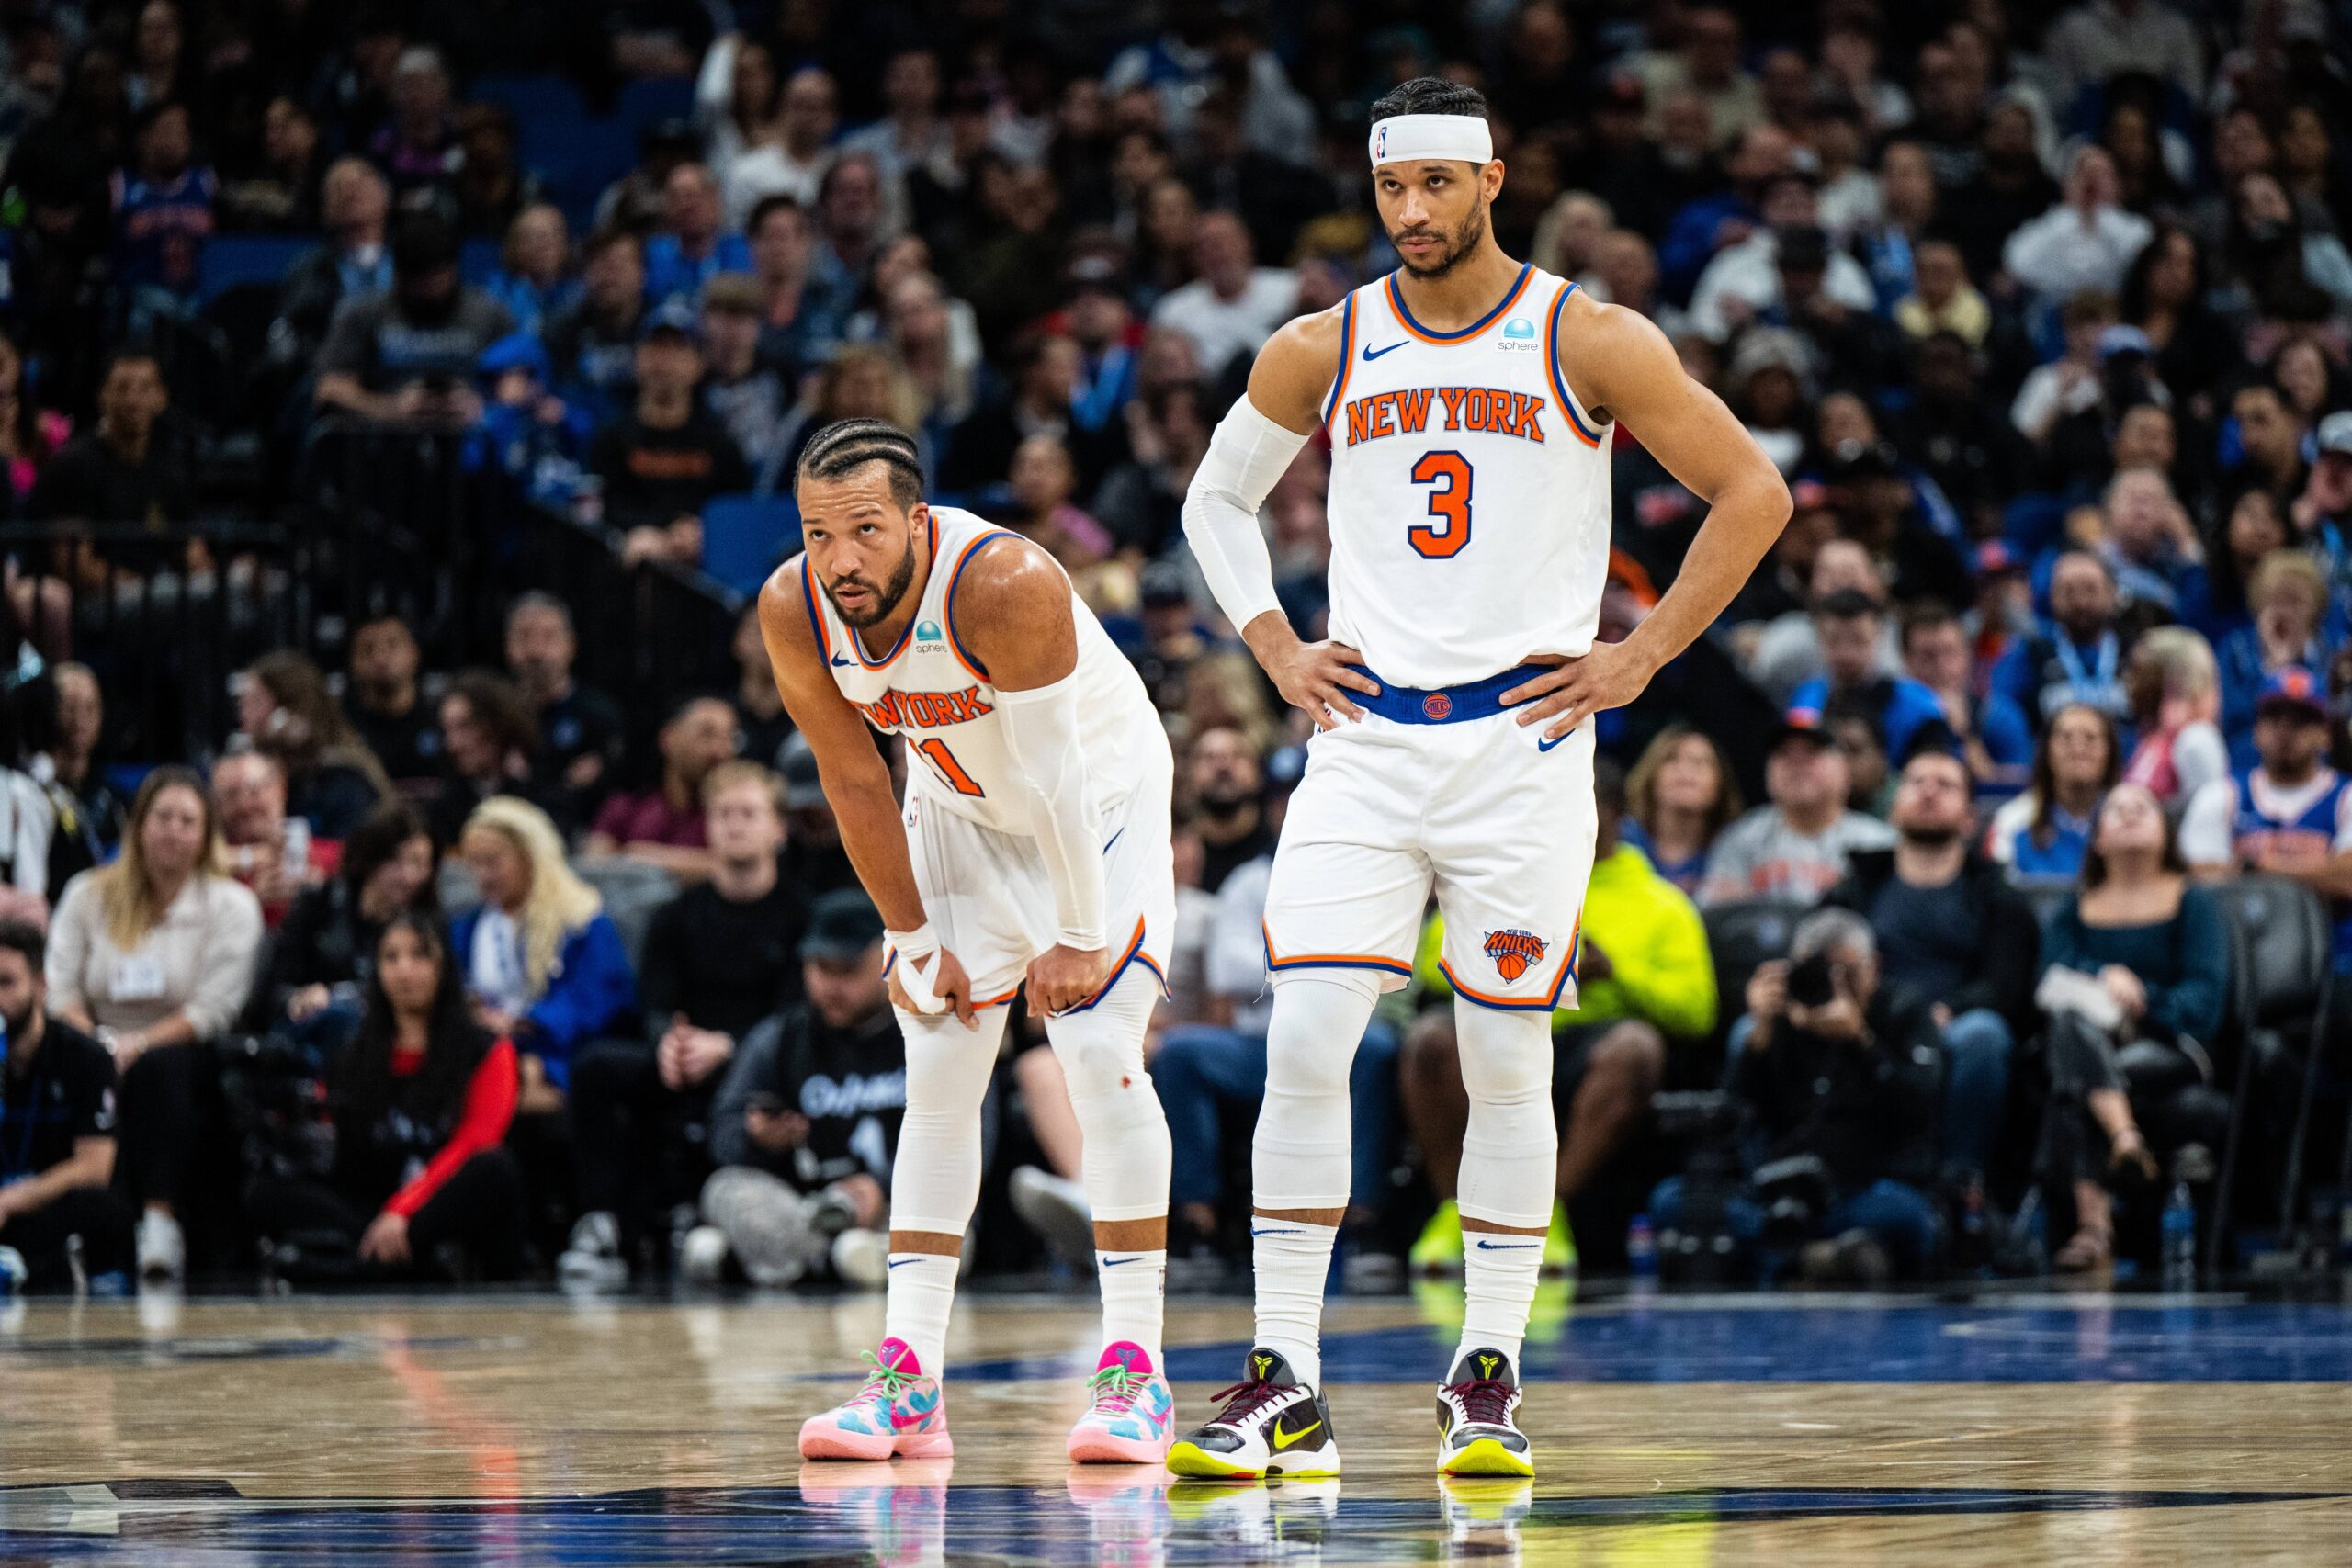 Jalen Brunson and Josh Hart are important players to the Knicks.